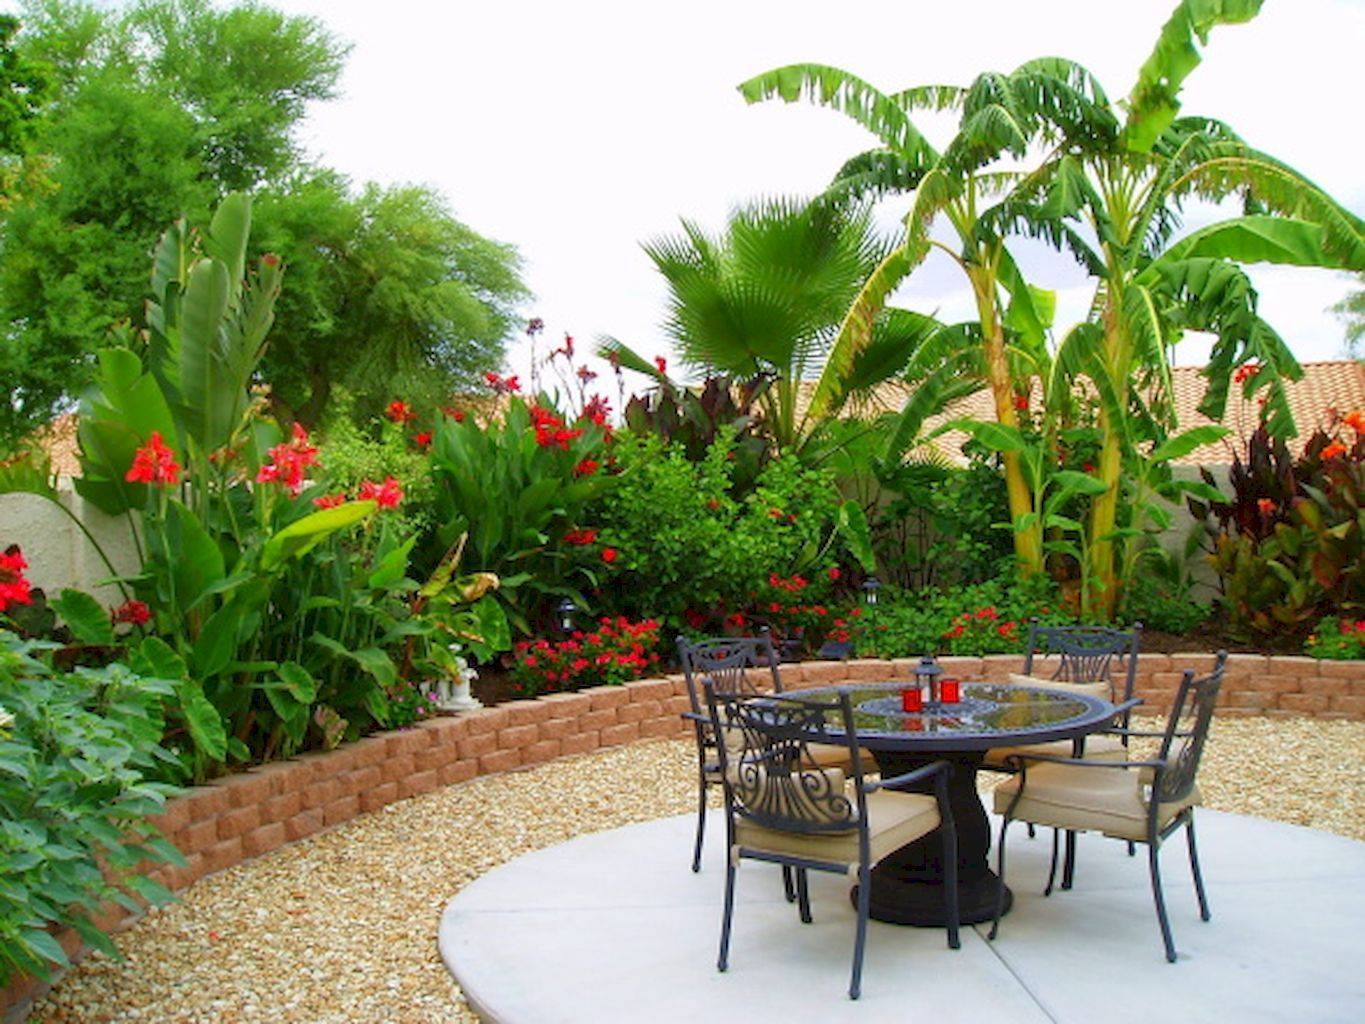 Tropical Landscaping Design Ideas Tropical Landscaping Landscaping